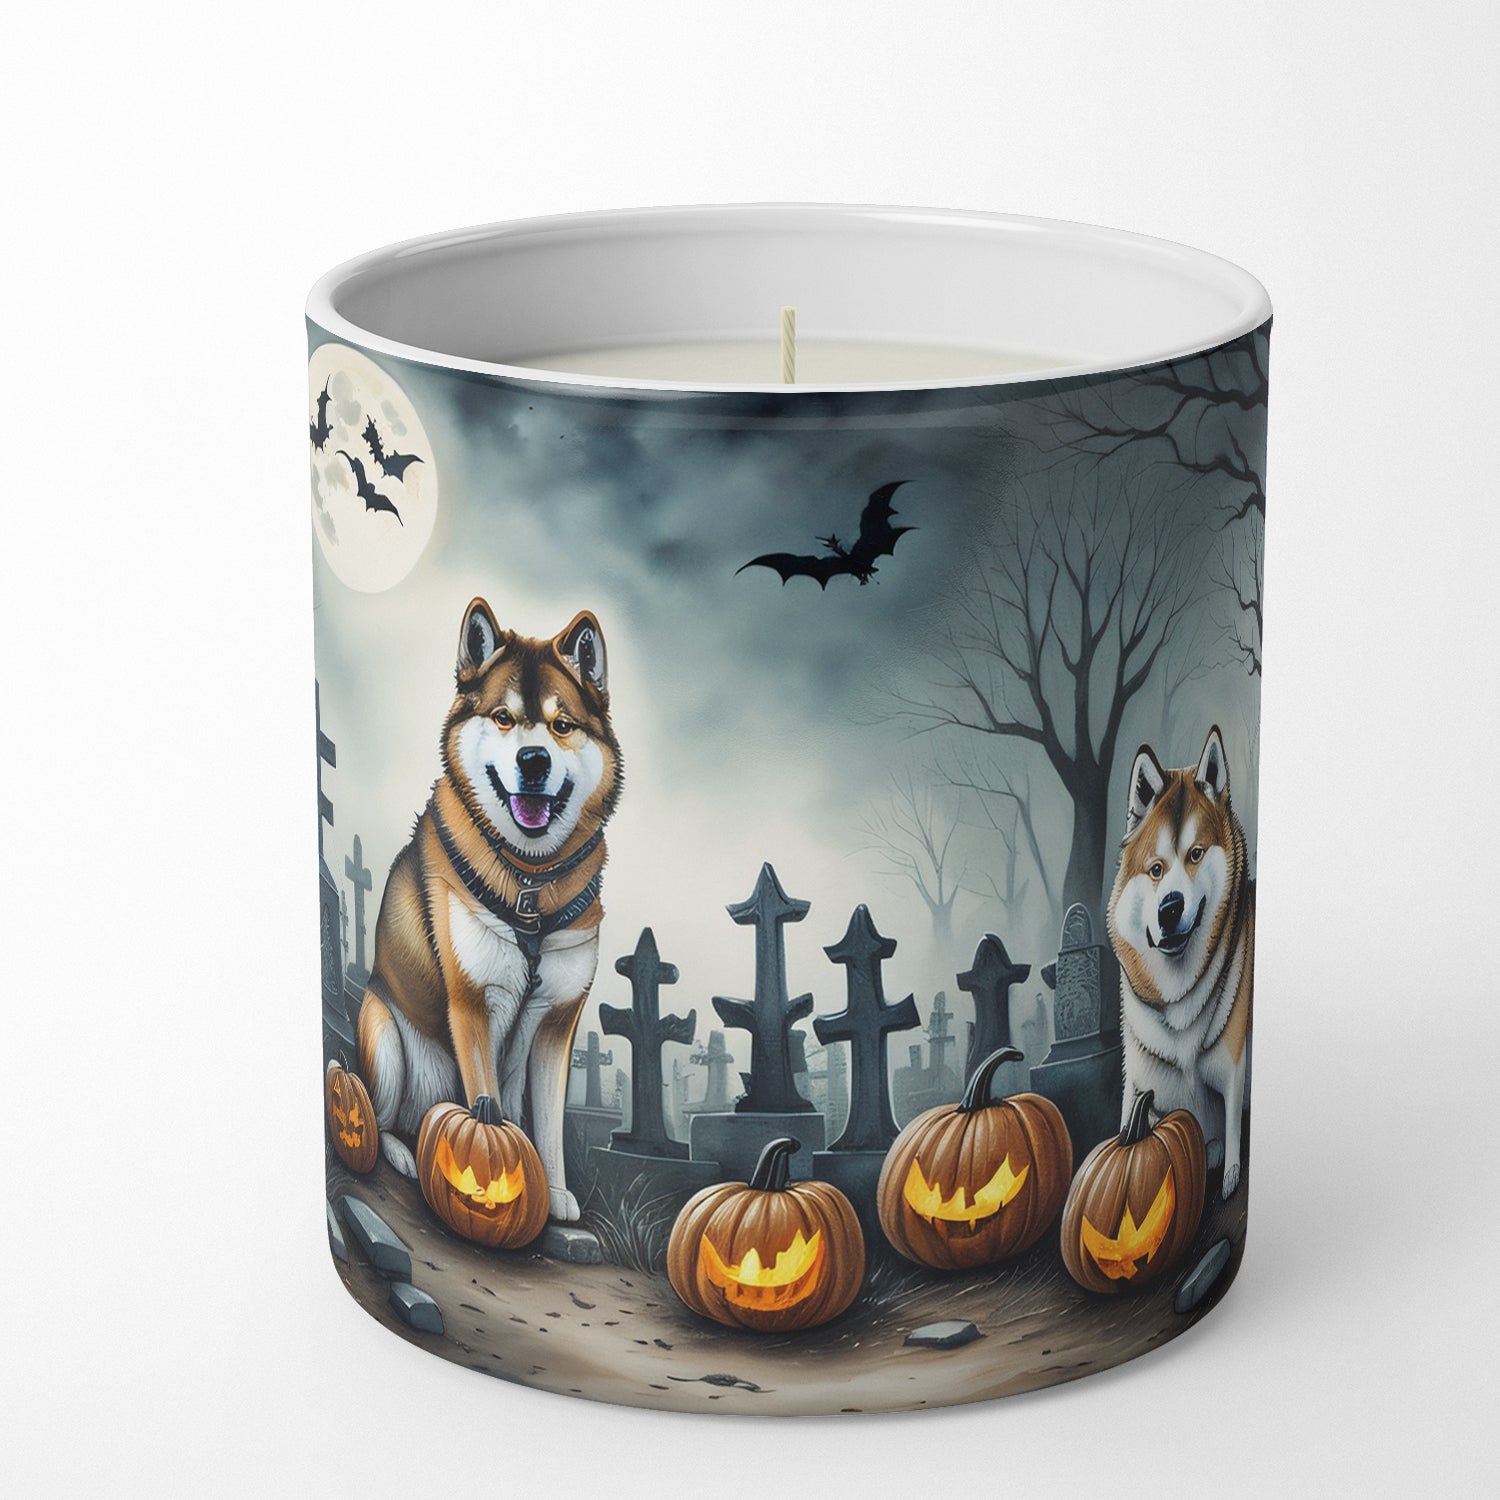 Buy this Akita Spooky Halloween Decorative Soy Candle